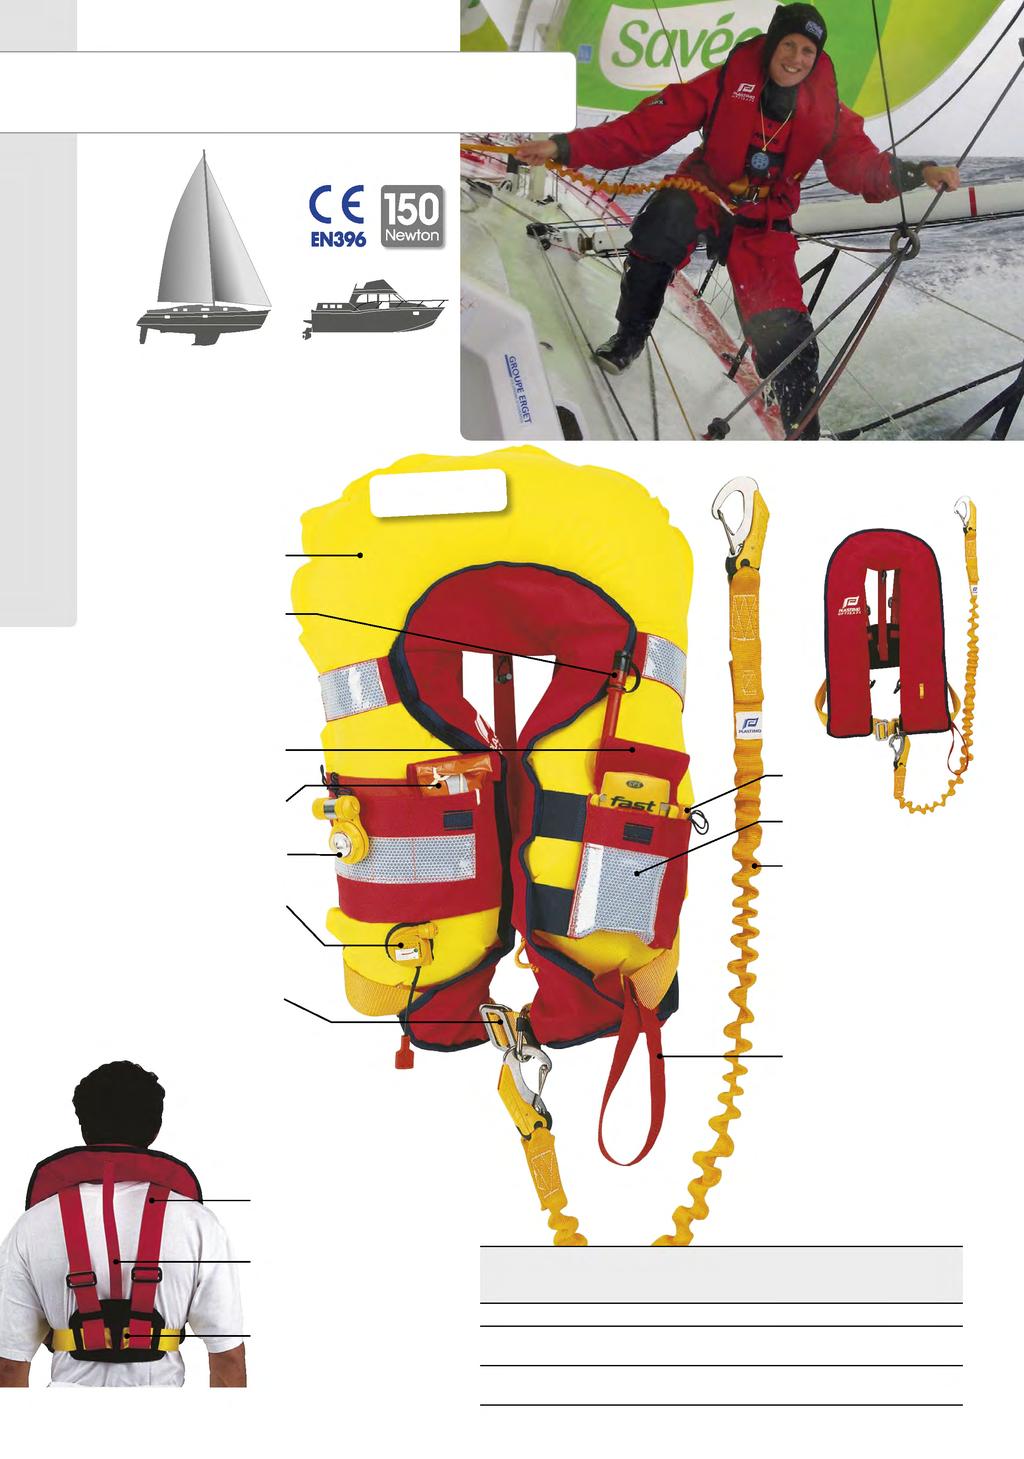 Optisafe inflatable lifejacket Cruising & blue water sailing 150 Newton inflatable lifejacket ; self-righting capacity. Independent neon yellow air chamber, protected by a very resistant outer cover.